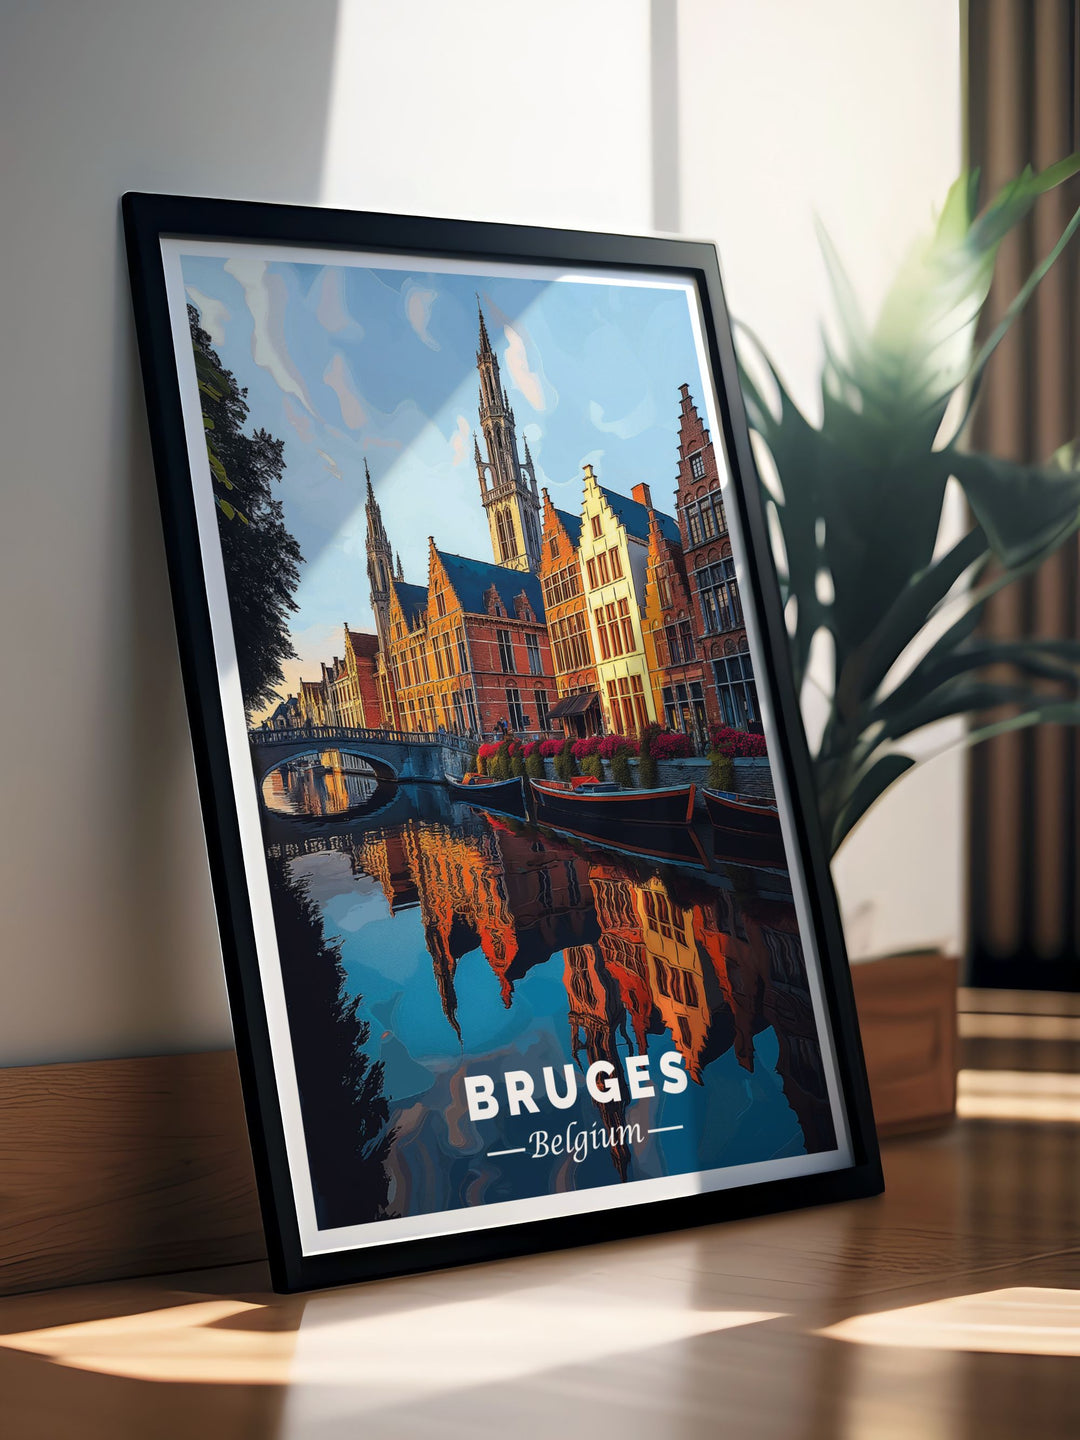 Exquisite Bruges artwork featuring a picturesque canal scene. This Belgium travel print brings the magic of Bruges to life with its detailed depiction of the citys beautiful waterways and historic bridges. Perfect for any home or office.